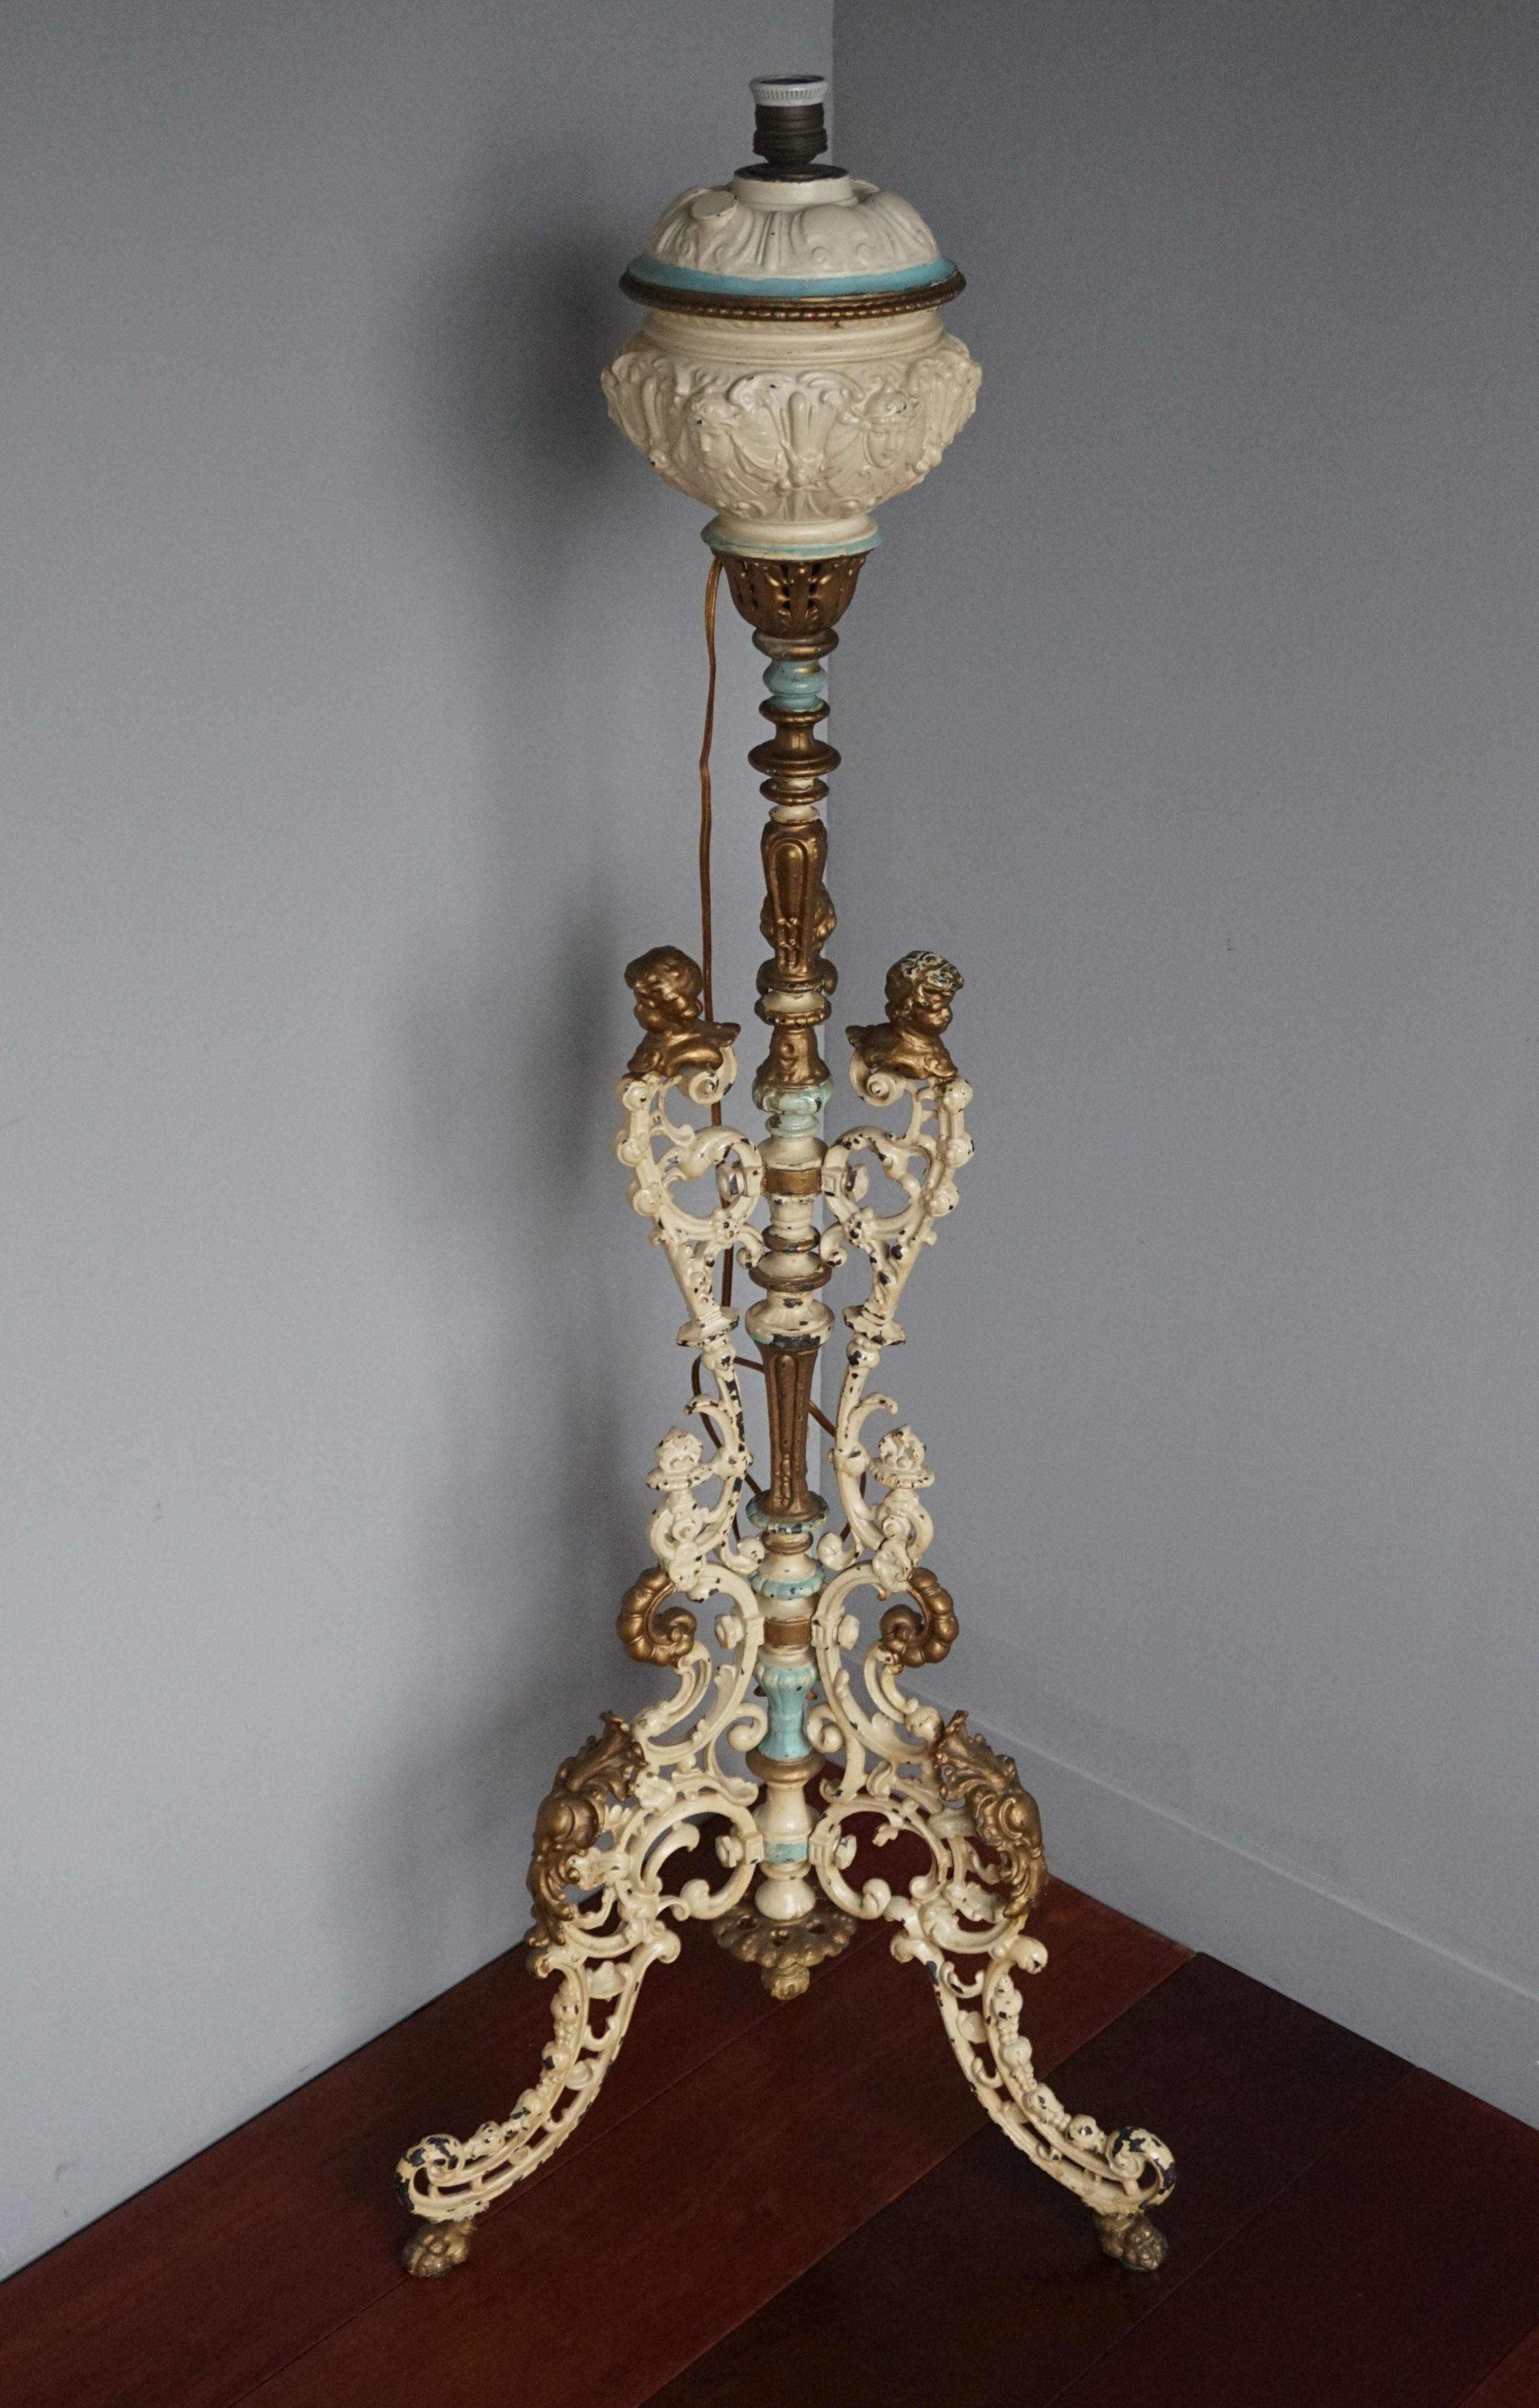 Antique and Painted Cast Iron Baroque Revival Floor Lamp w. Putti Bust Sculpture For Sale 5